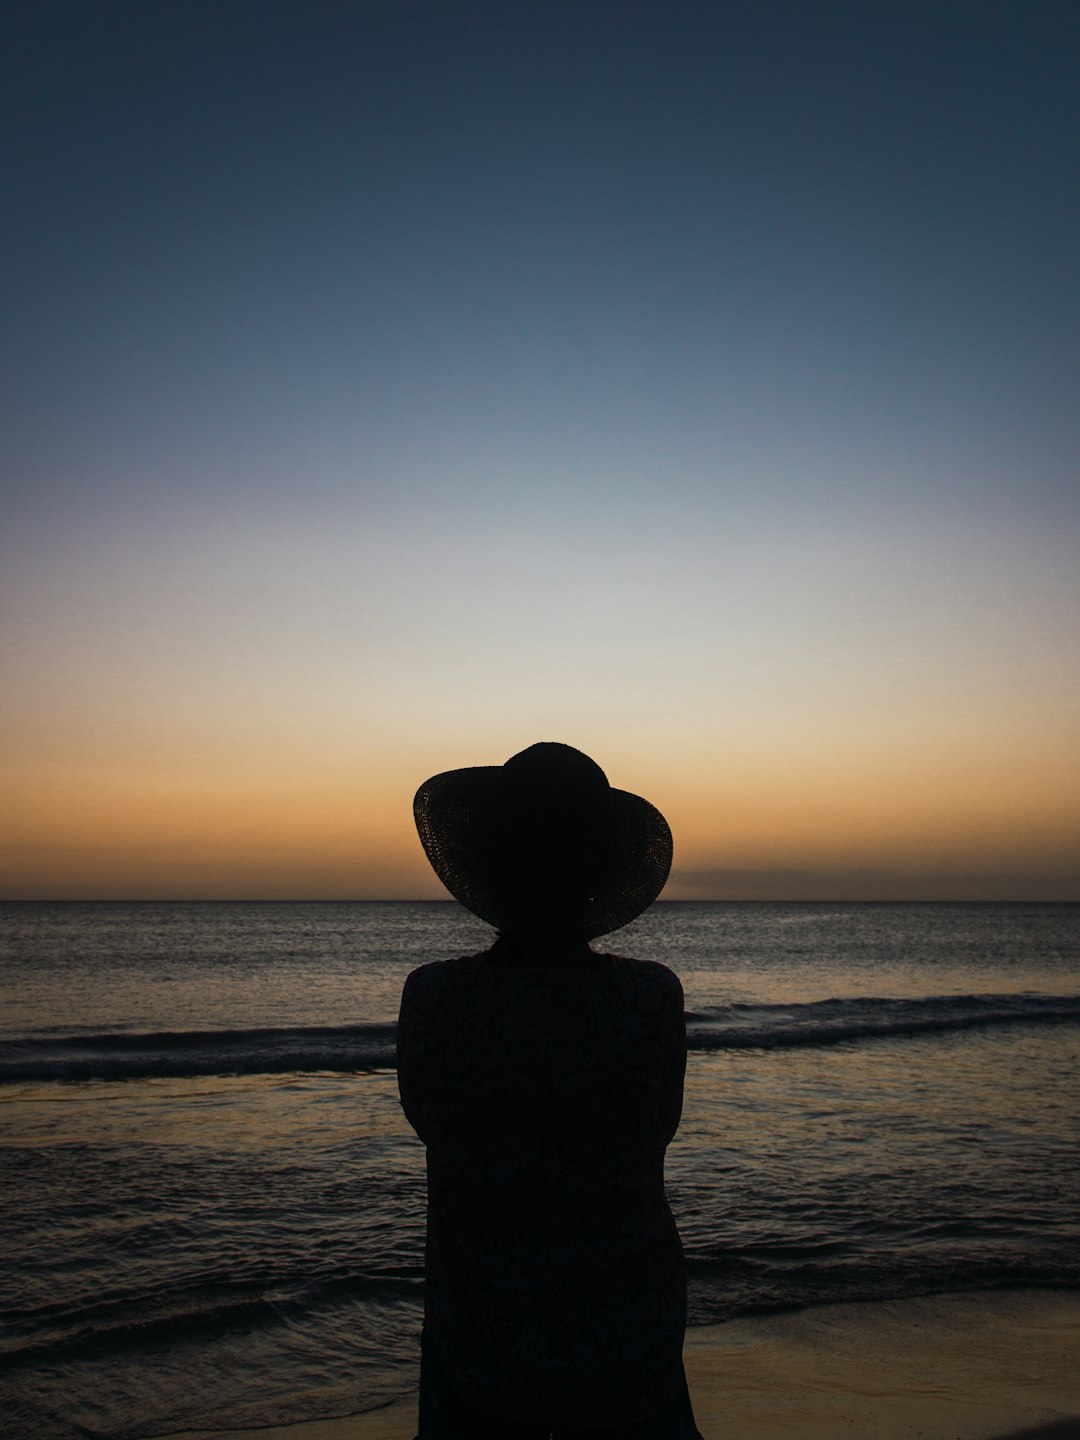 silhouette of person wearing hat standing on seashore during sunset